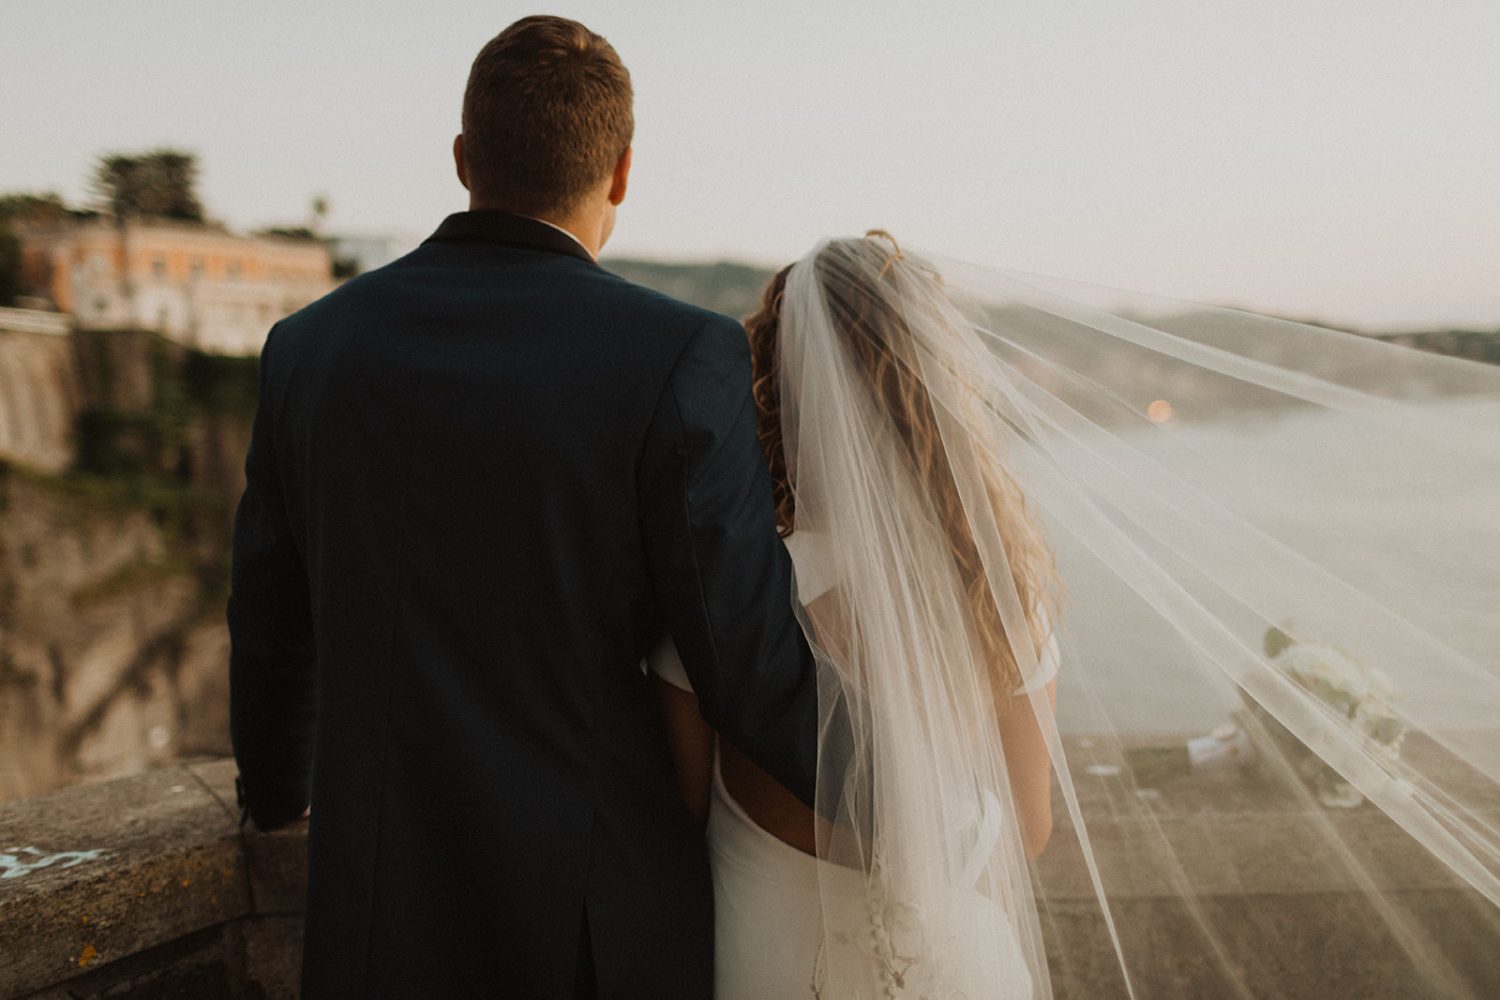 Bride's cathedral veil flows in wind